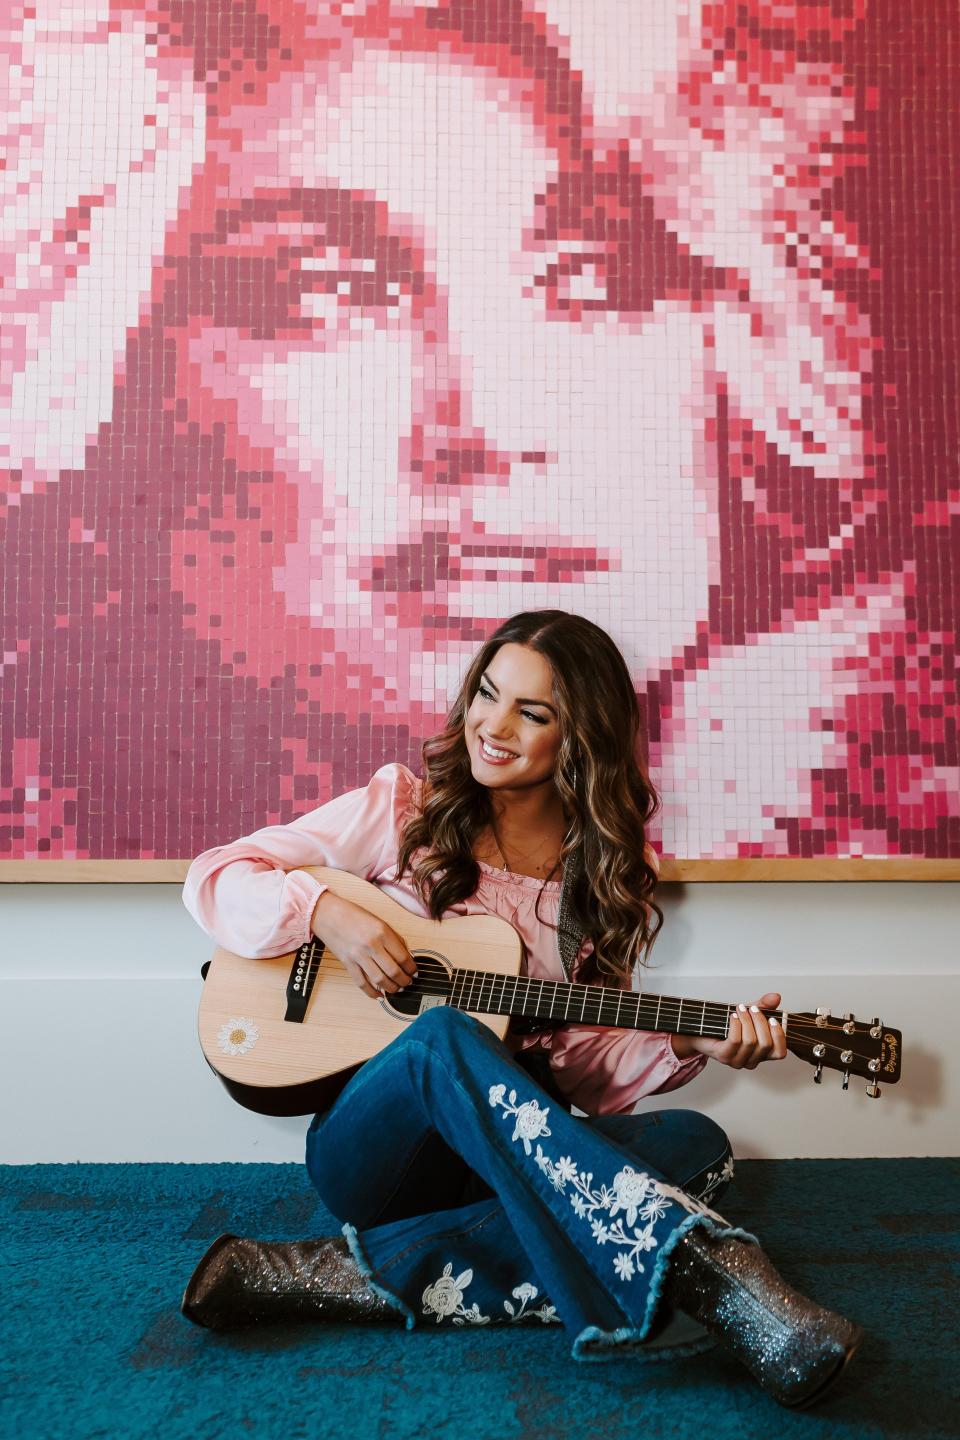 Stark County native and Nashville country music artist Lauren Mascitti played an energetic and impassioned two-hour set Saturday night at The Speakeasy at the Canton Brewing Co. Due to rain, the Concert for First Responders was moved indoors from Centennial Plaza in downtown Canton.